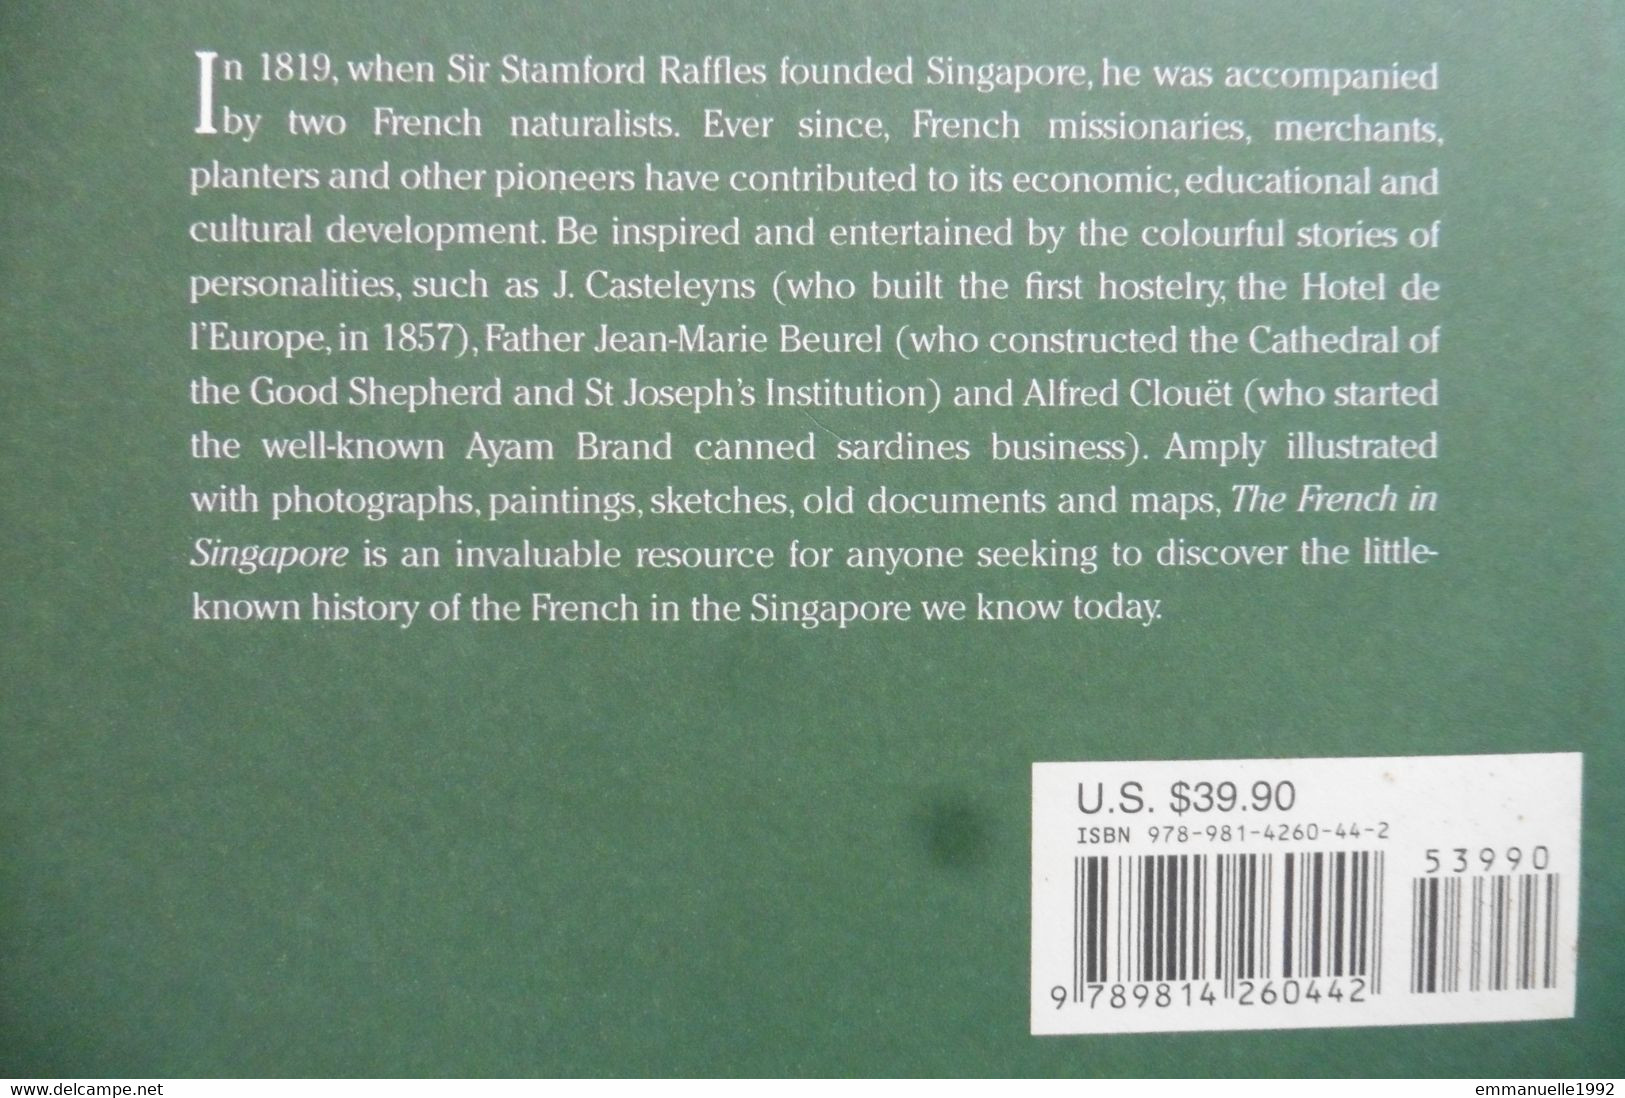 Book The French In Singapore, An Illustrated History 1819-today - Pilon Weiler 2011 - Asiatica